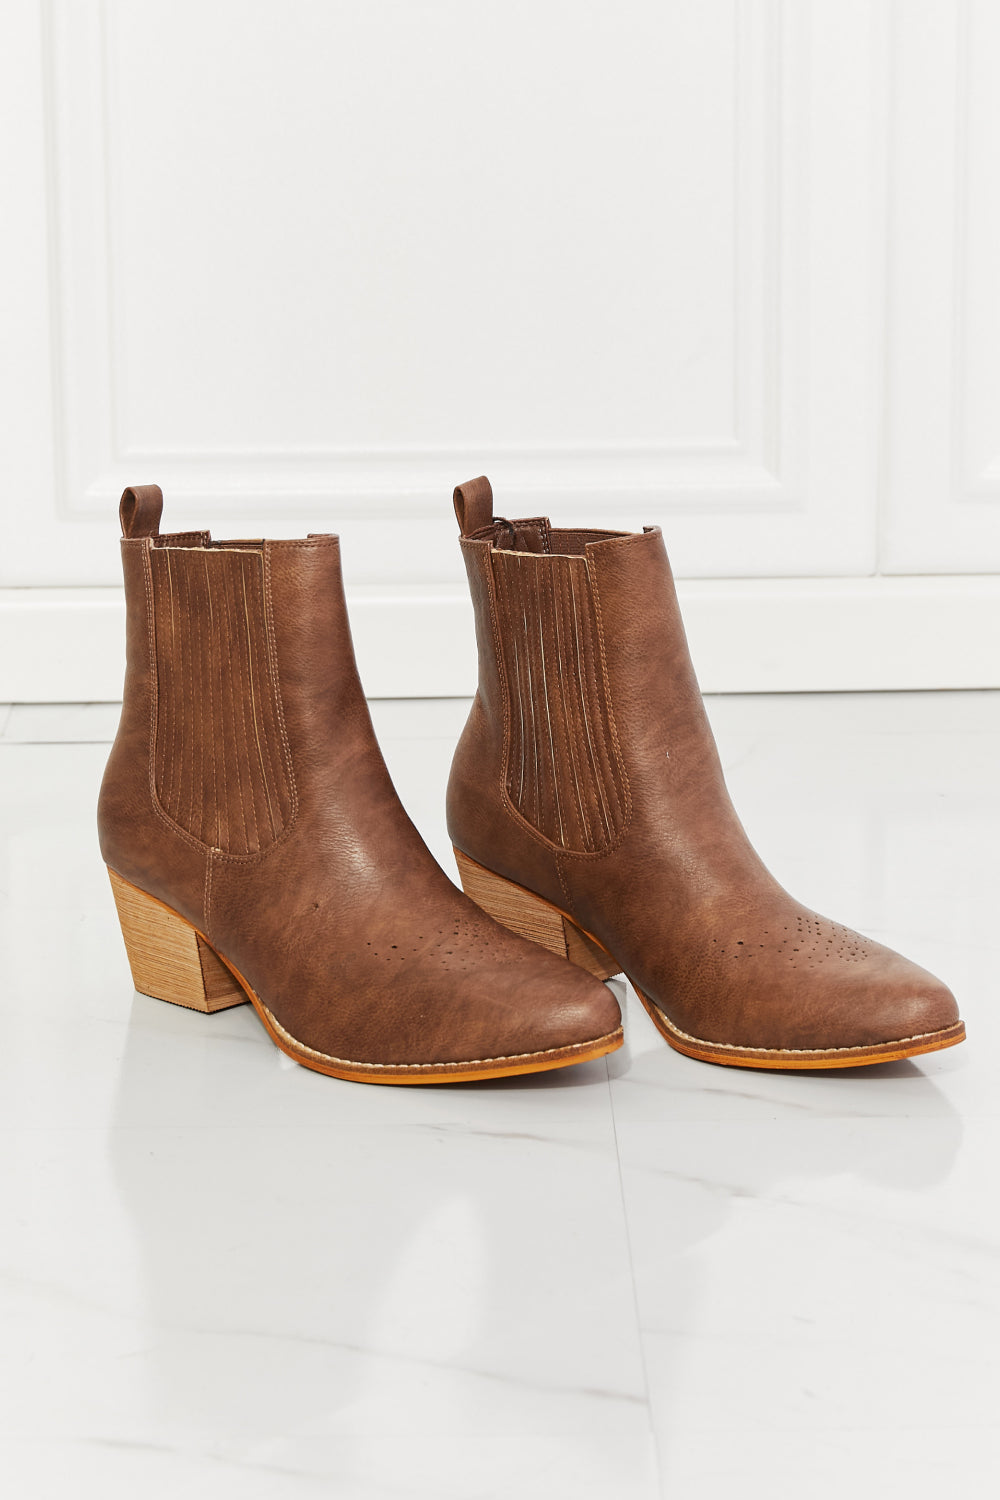 MMShoes Love the Journey Stacked Heel Chelsea Boot in Chestnut - Luv Lush